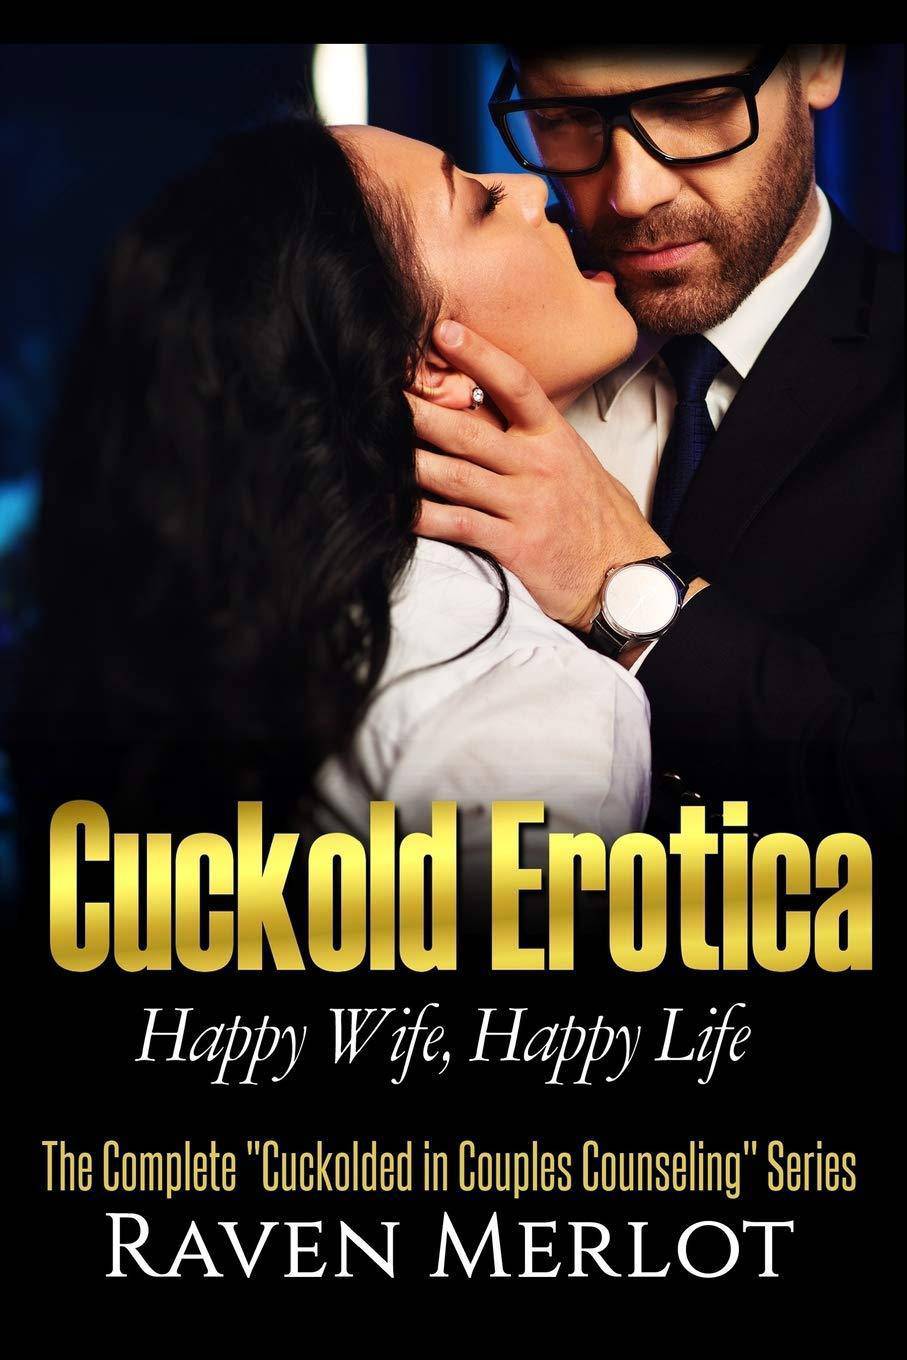 The Complete "Cuckolded in Couples Counseling" Series - SureShot Books Publishing LLC